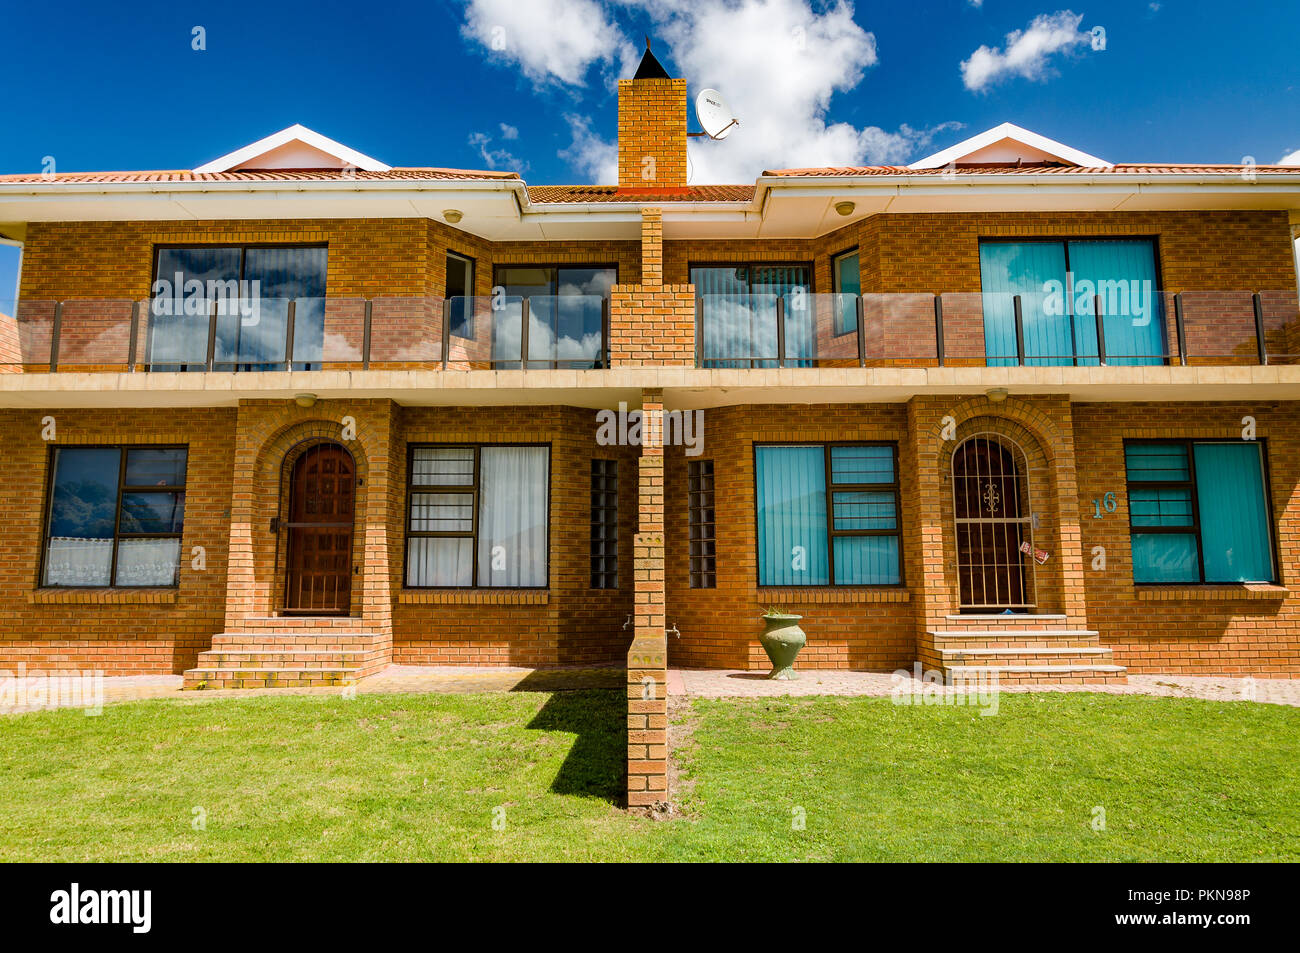 Orange brick stark modern houses with grass lawns in Mossel Bay, South Africa Stock Photo